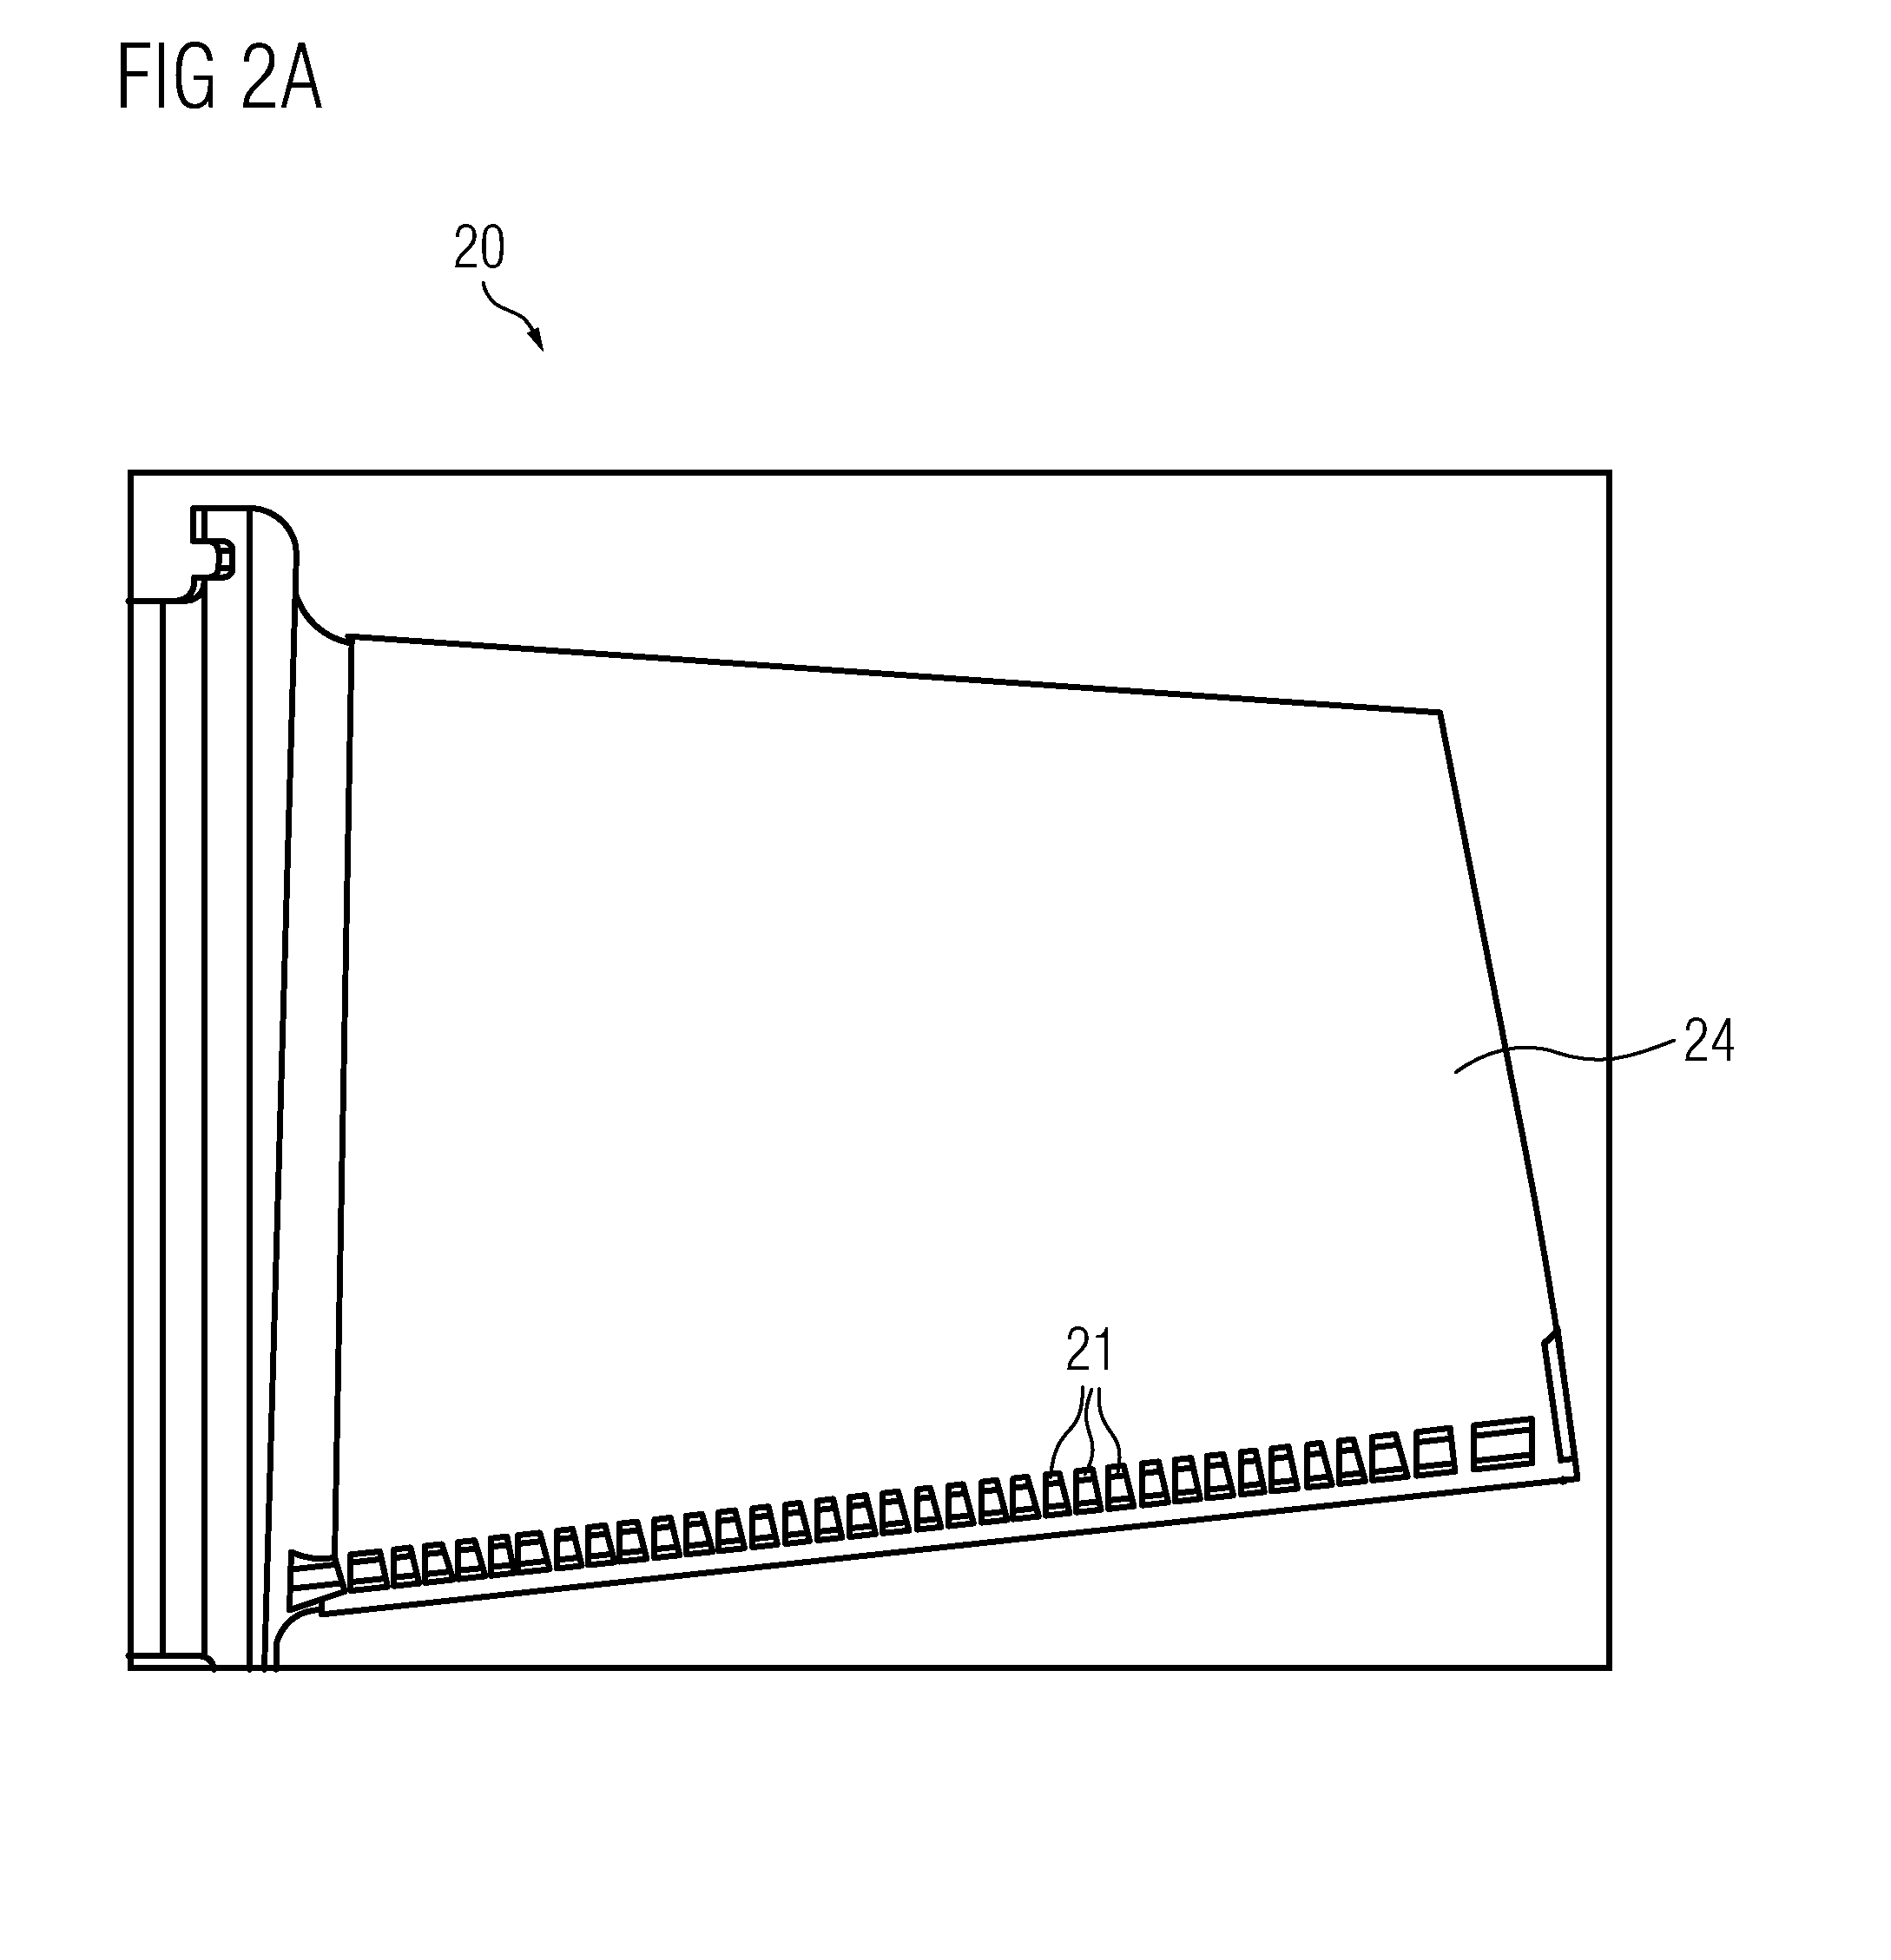 Apparatus and method for automatic inspection of through-holes of a component